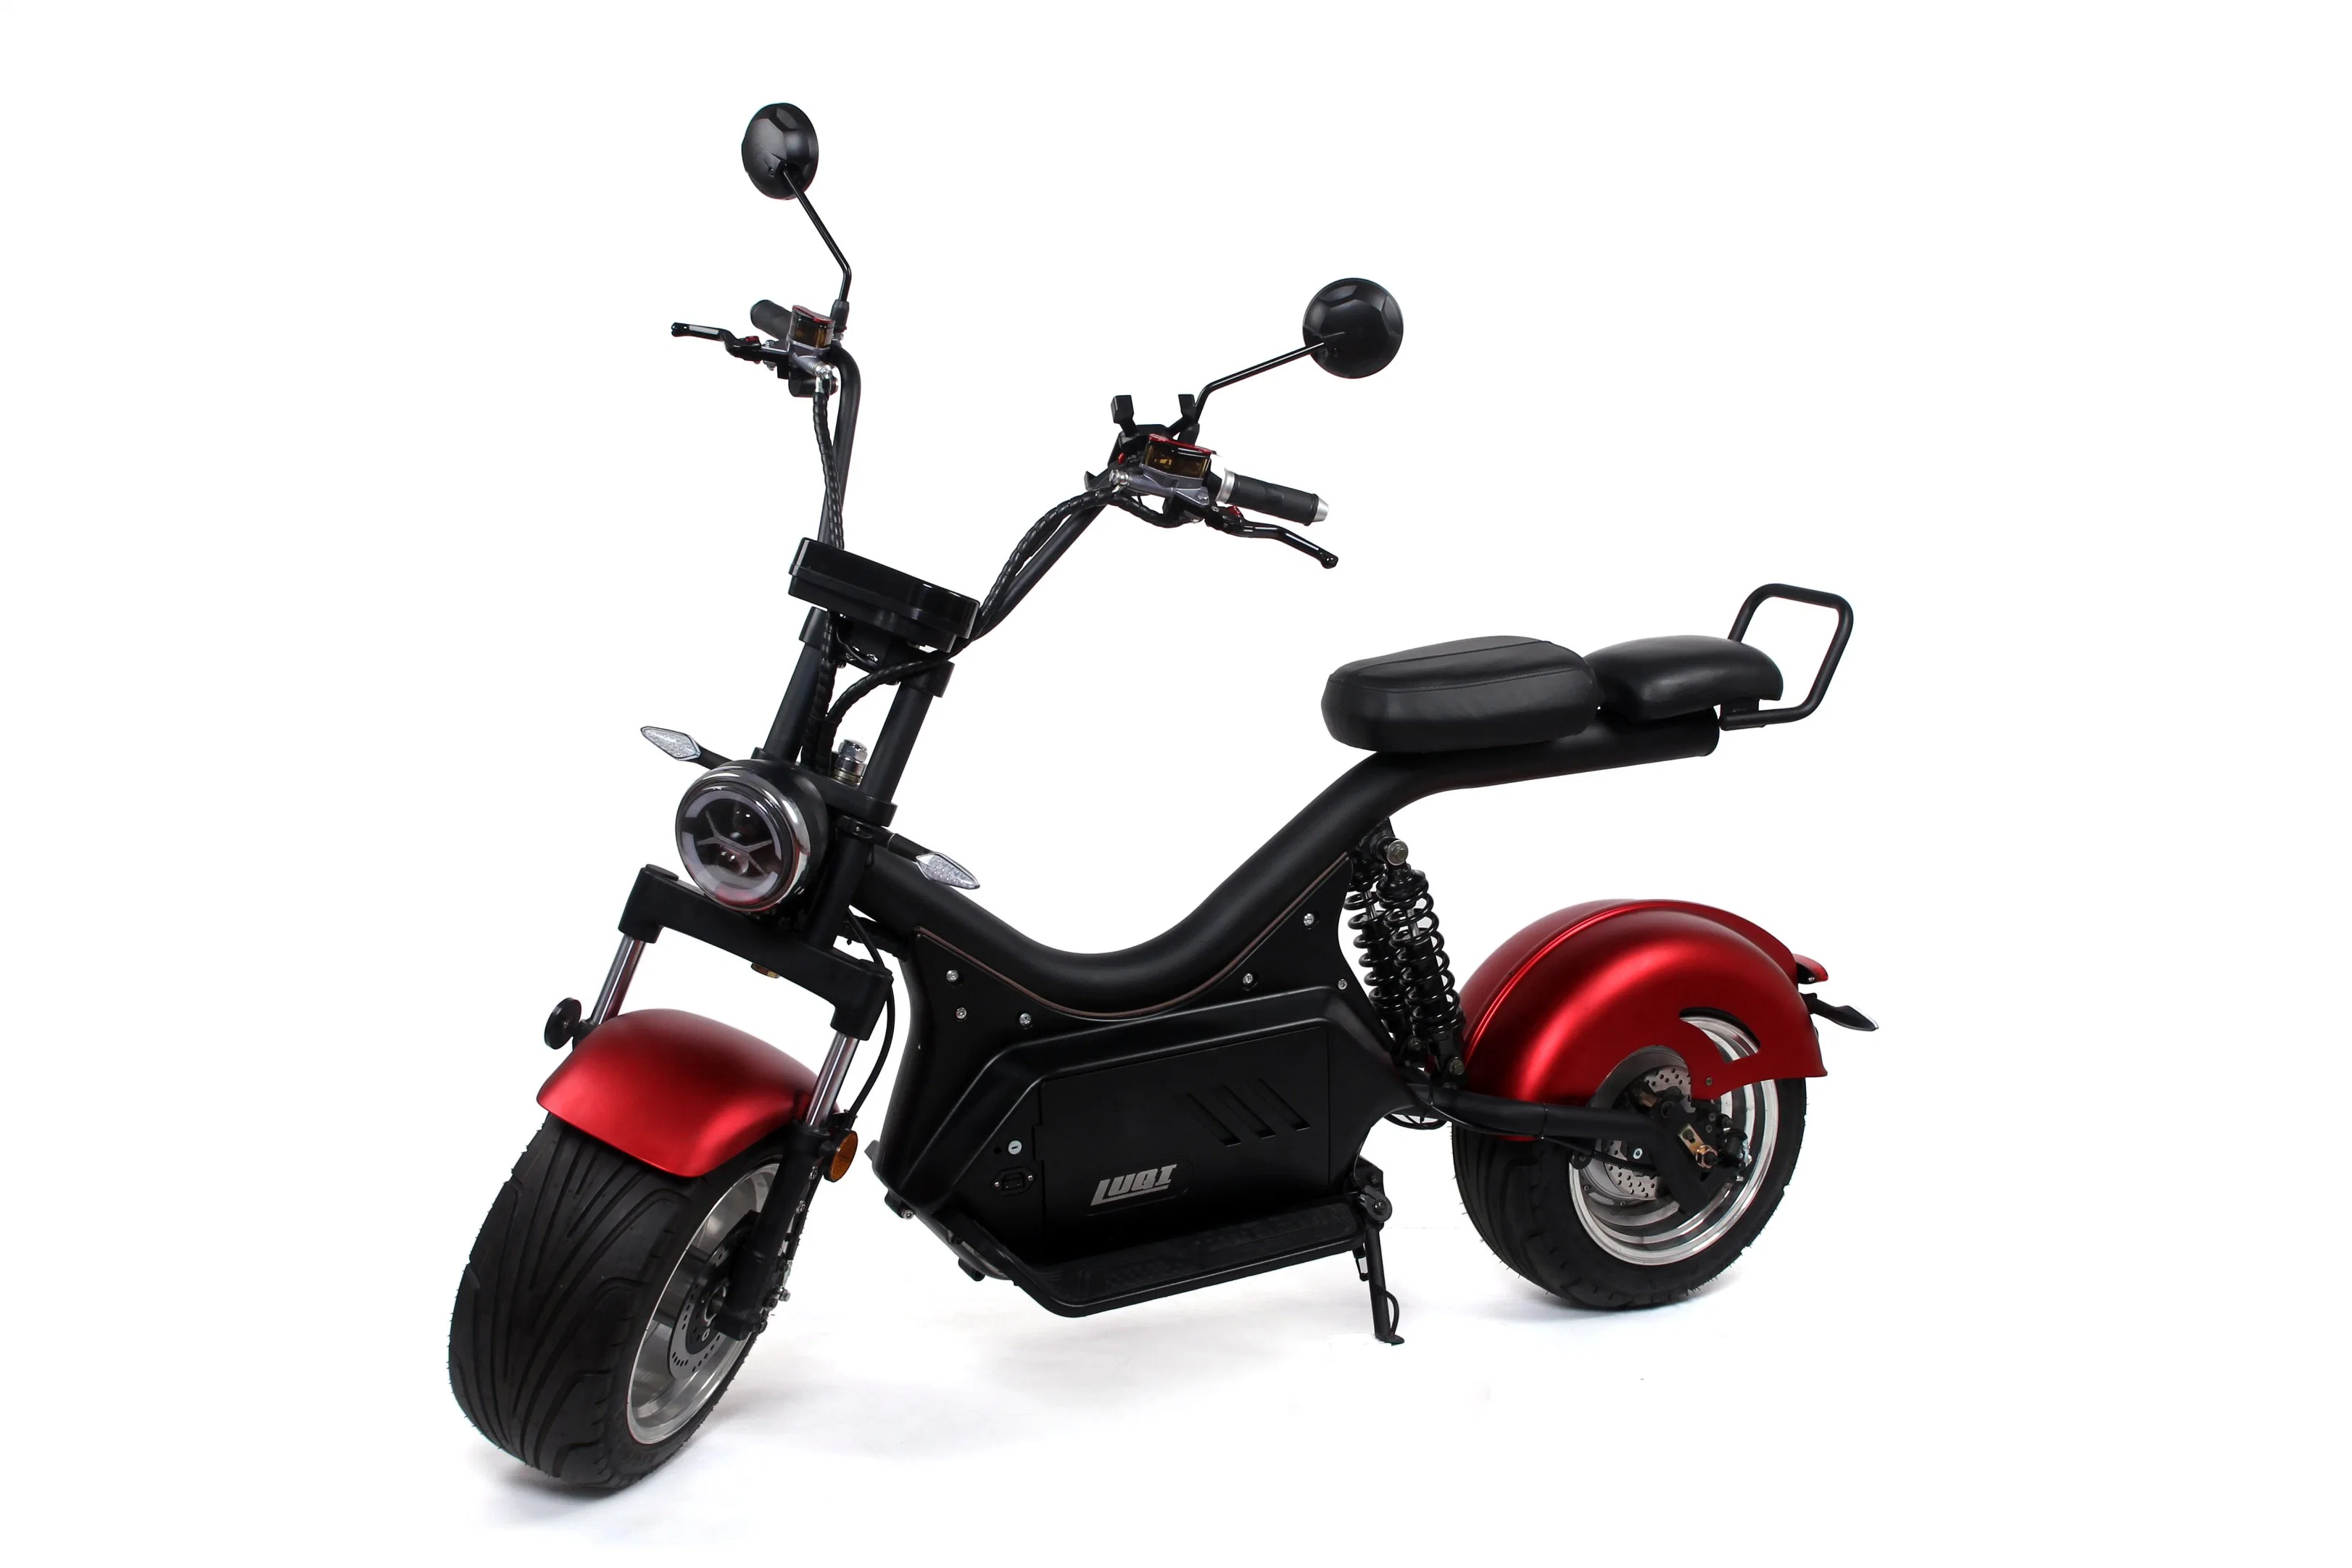 Heavy Load 2000W Motor Removable Battery Customized Balancing Electric Motorcycle